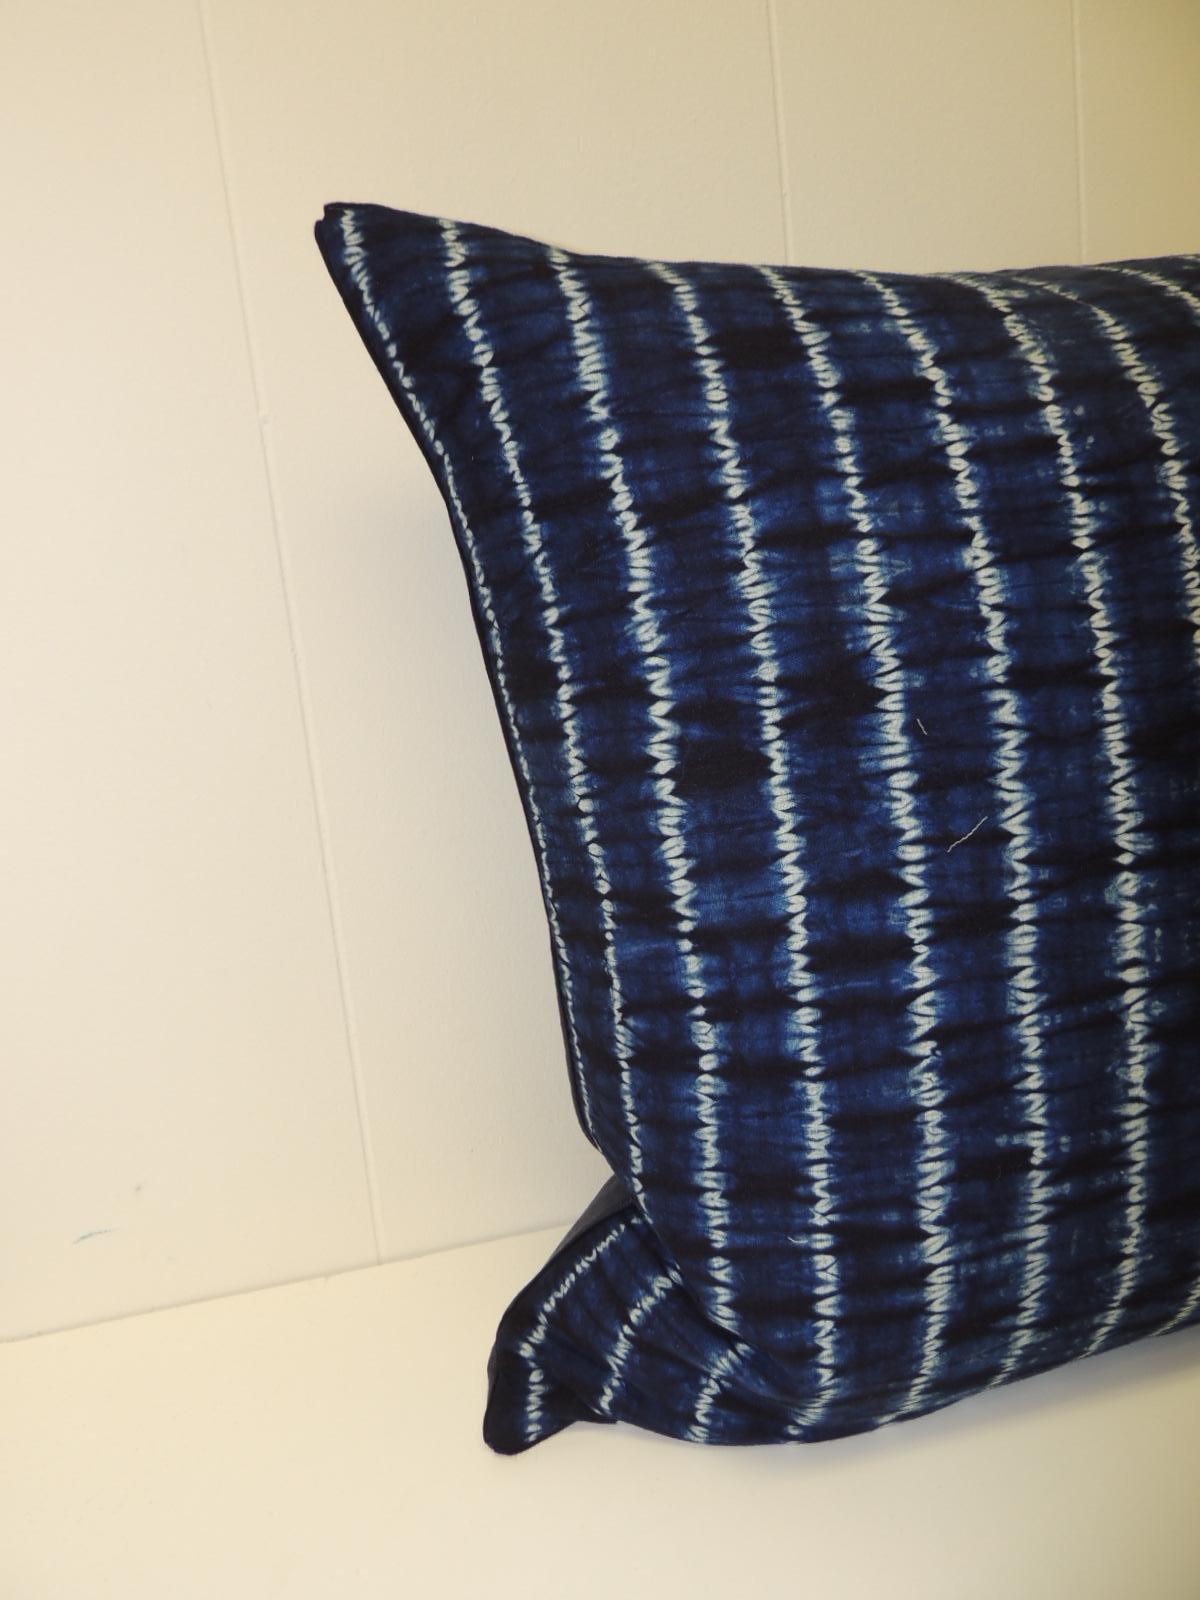 Vintage Indigo and White African Resist-dye Textile Decorative Pillow
Square pillow with textured navy blue backing and small dark blue 
decorative trim all around made from the same vintage textile.
Decorative pillows handmade and designed in the